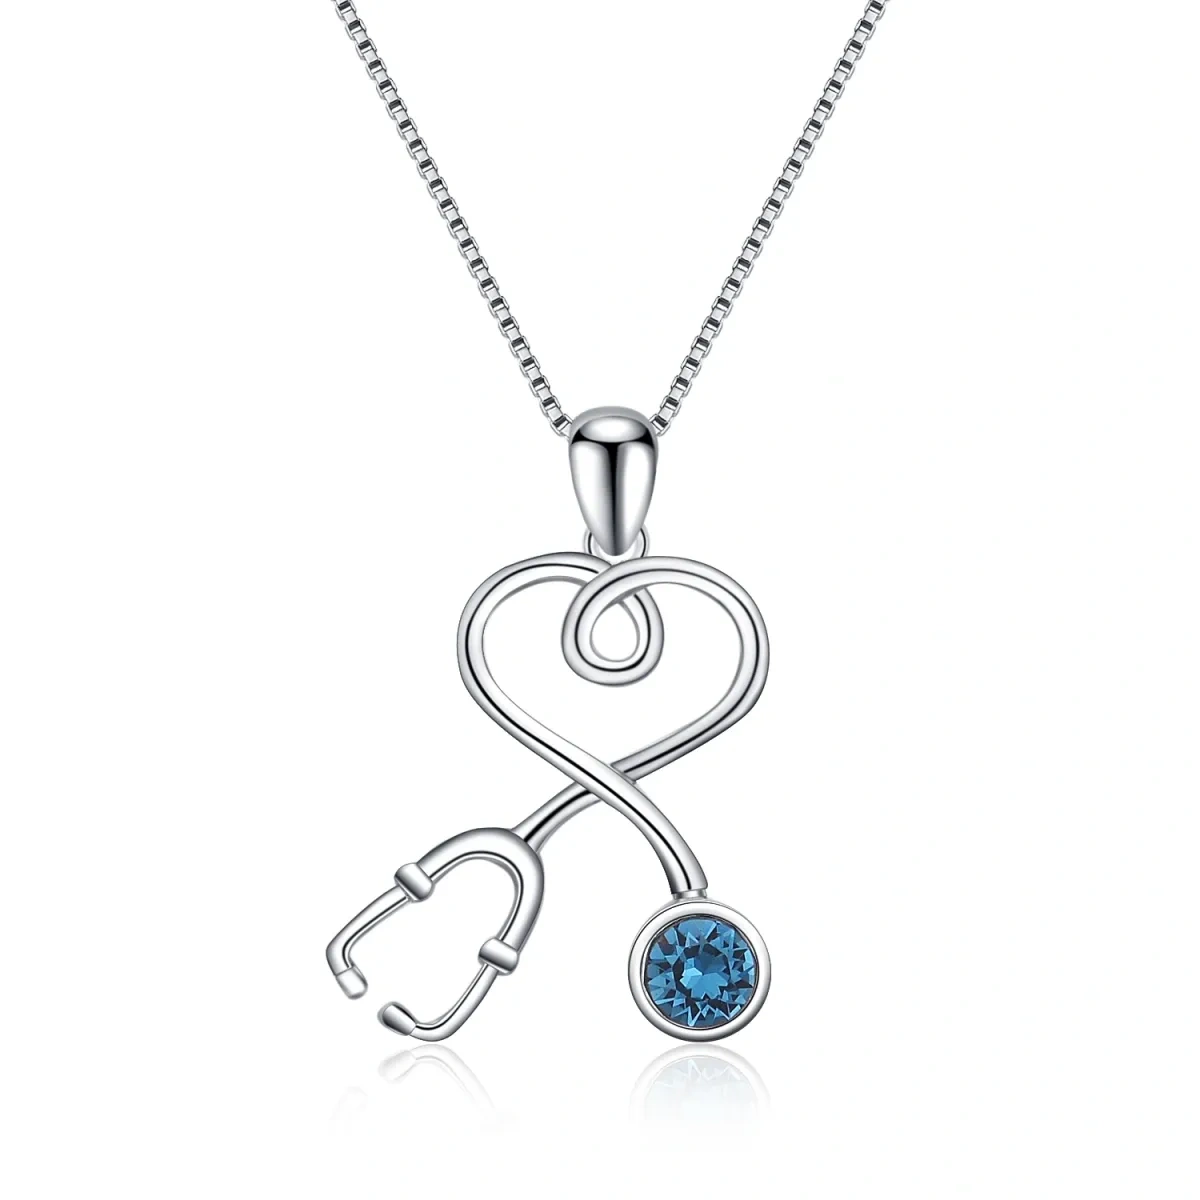 Nurse Doctor Stethoscope Necklace 925 Sterling Silver with Charm Pendant-1